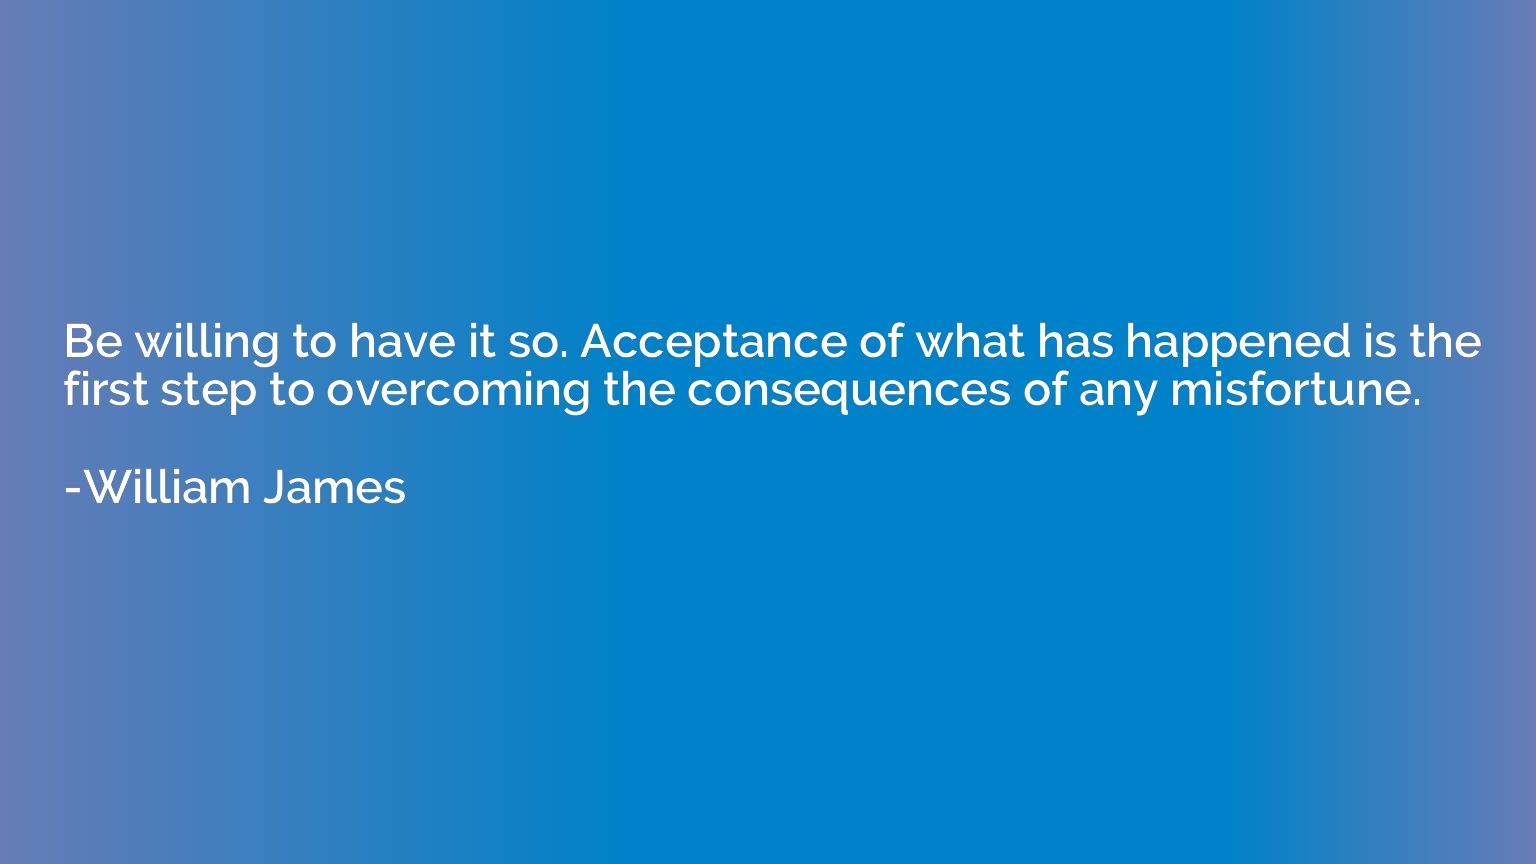 Be willing to have it so. Acceptance of what has happened is